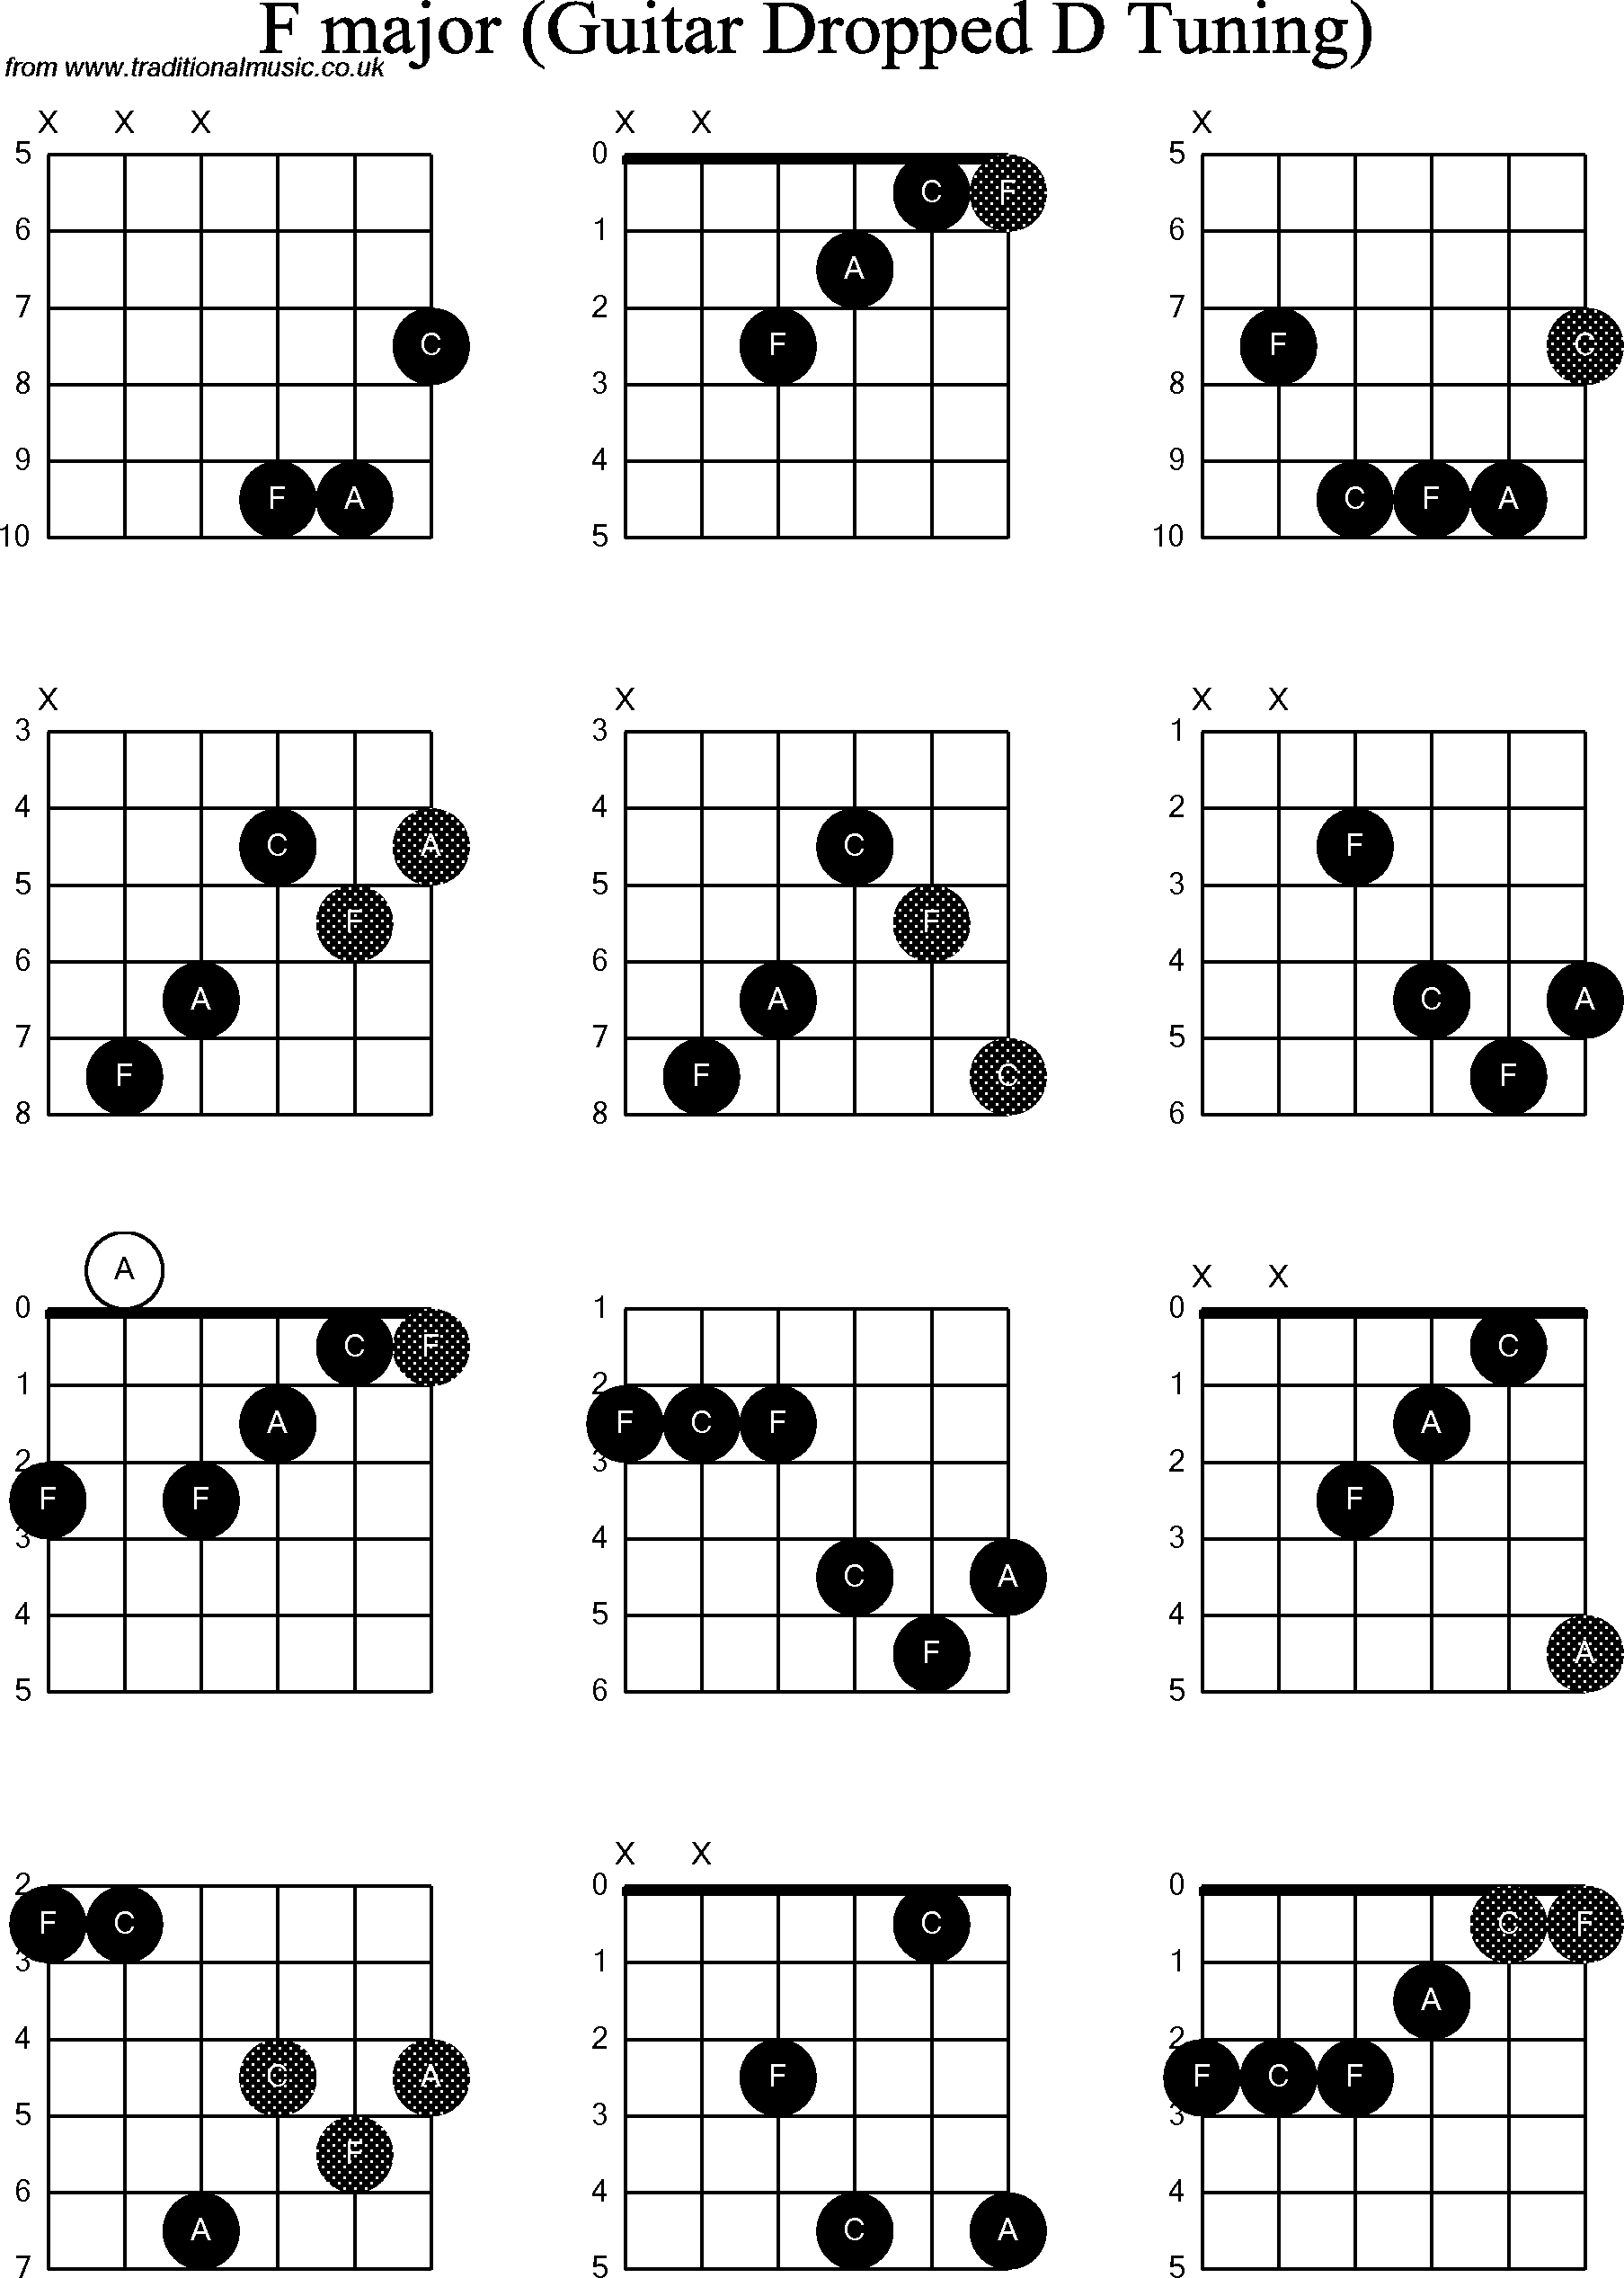 Chord diagrams for dropped D Guitar(DADGBE), F